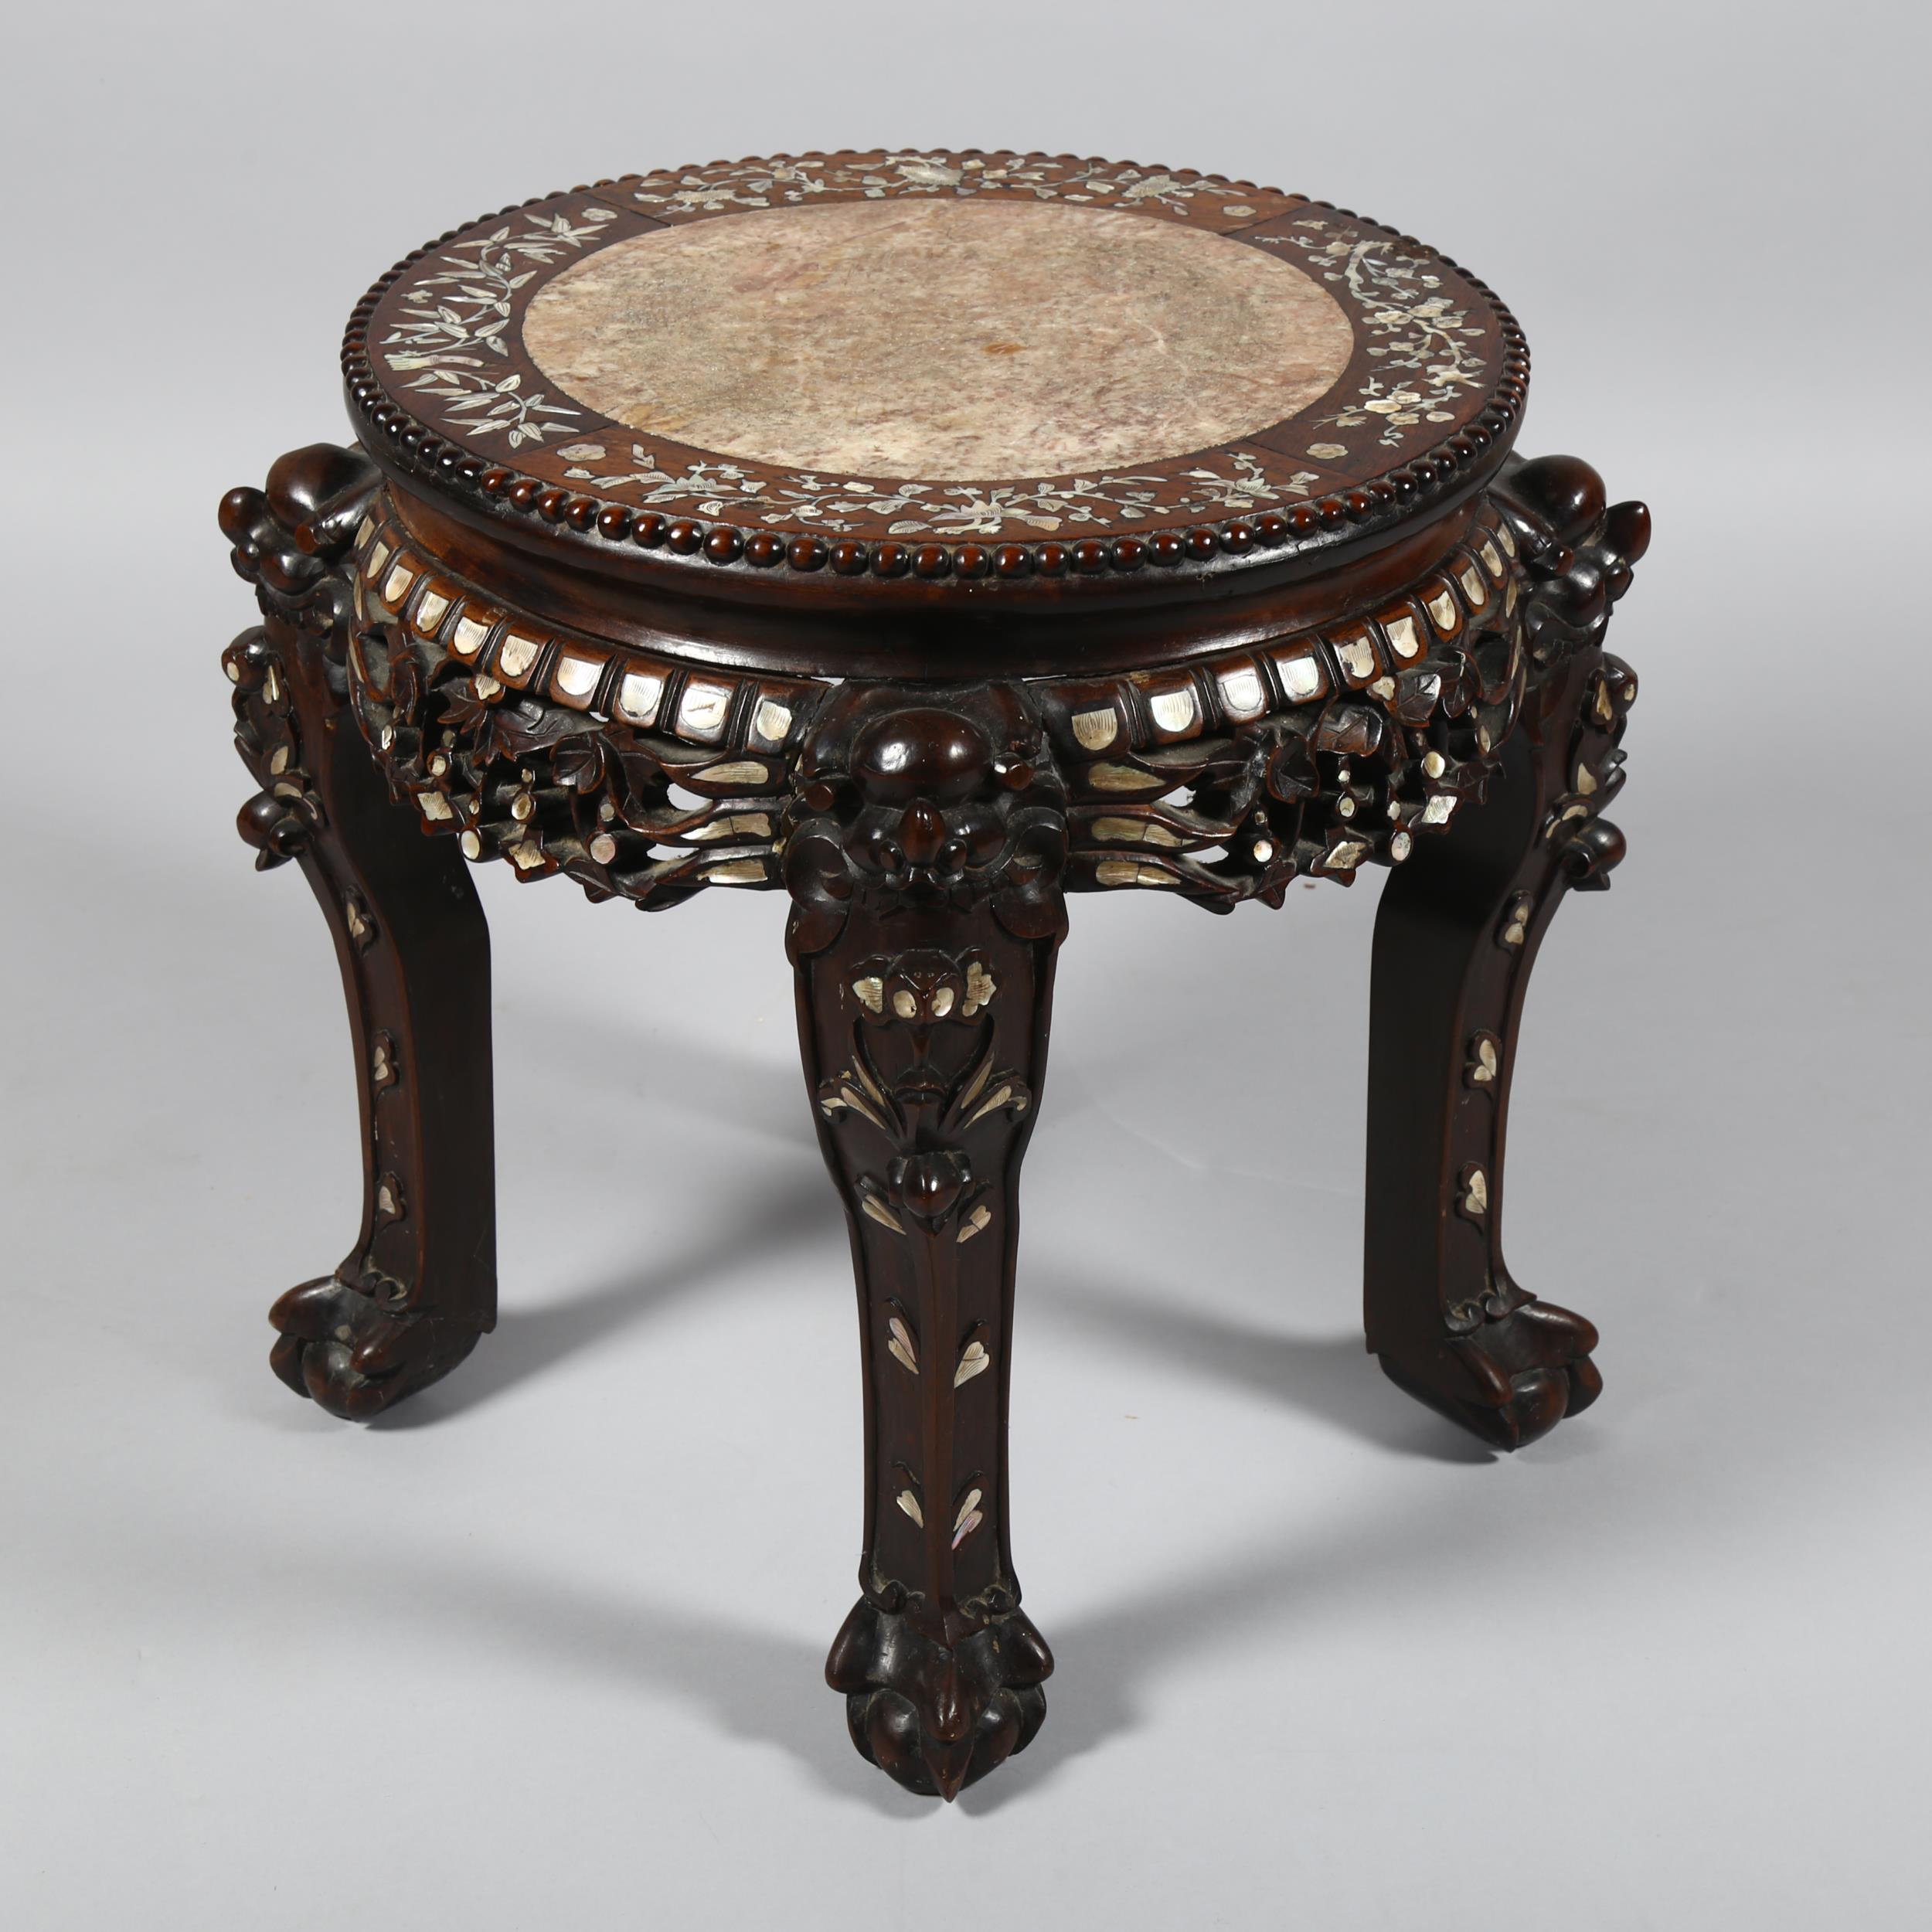 A 19th century Chinese hardwood and mother-of-pearl inlaid circular table, with inset marble top, - Image 2 of 6